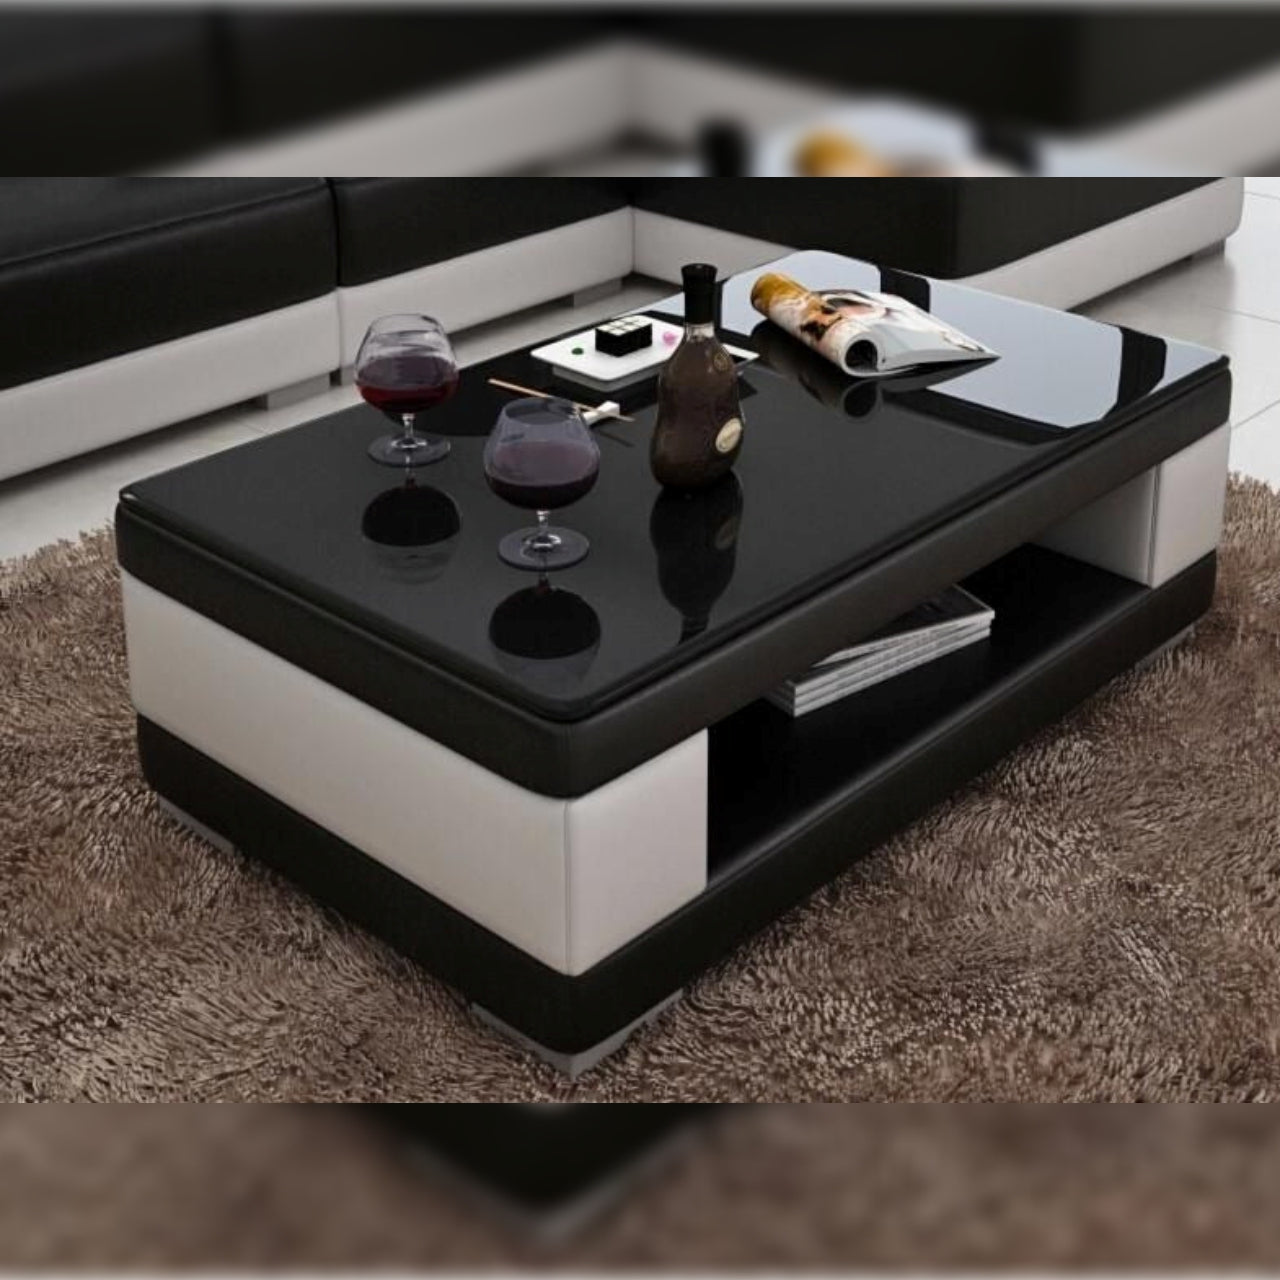 Leatherette Coffee Table Contemporary Black and White Leatherette Coffee Table WBlack Glass Table Top